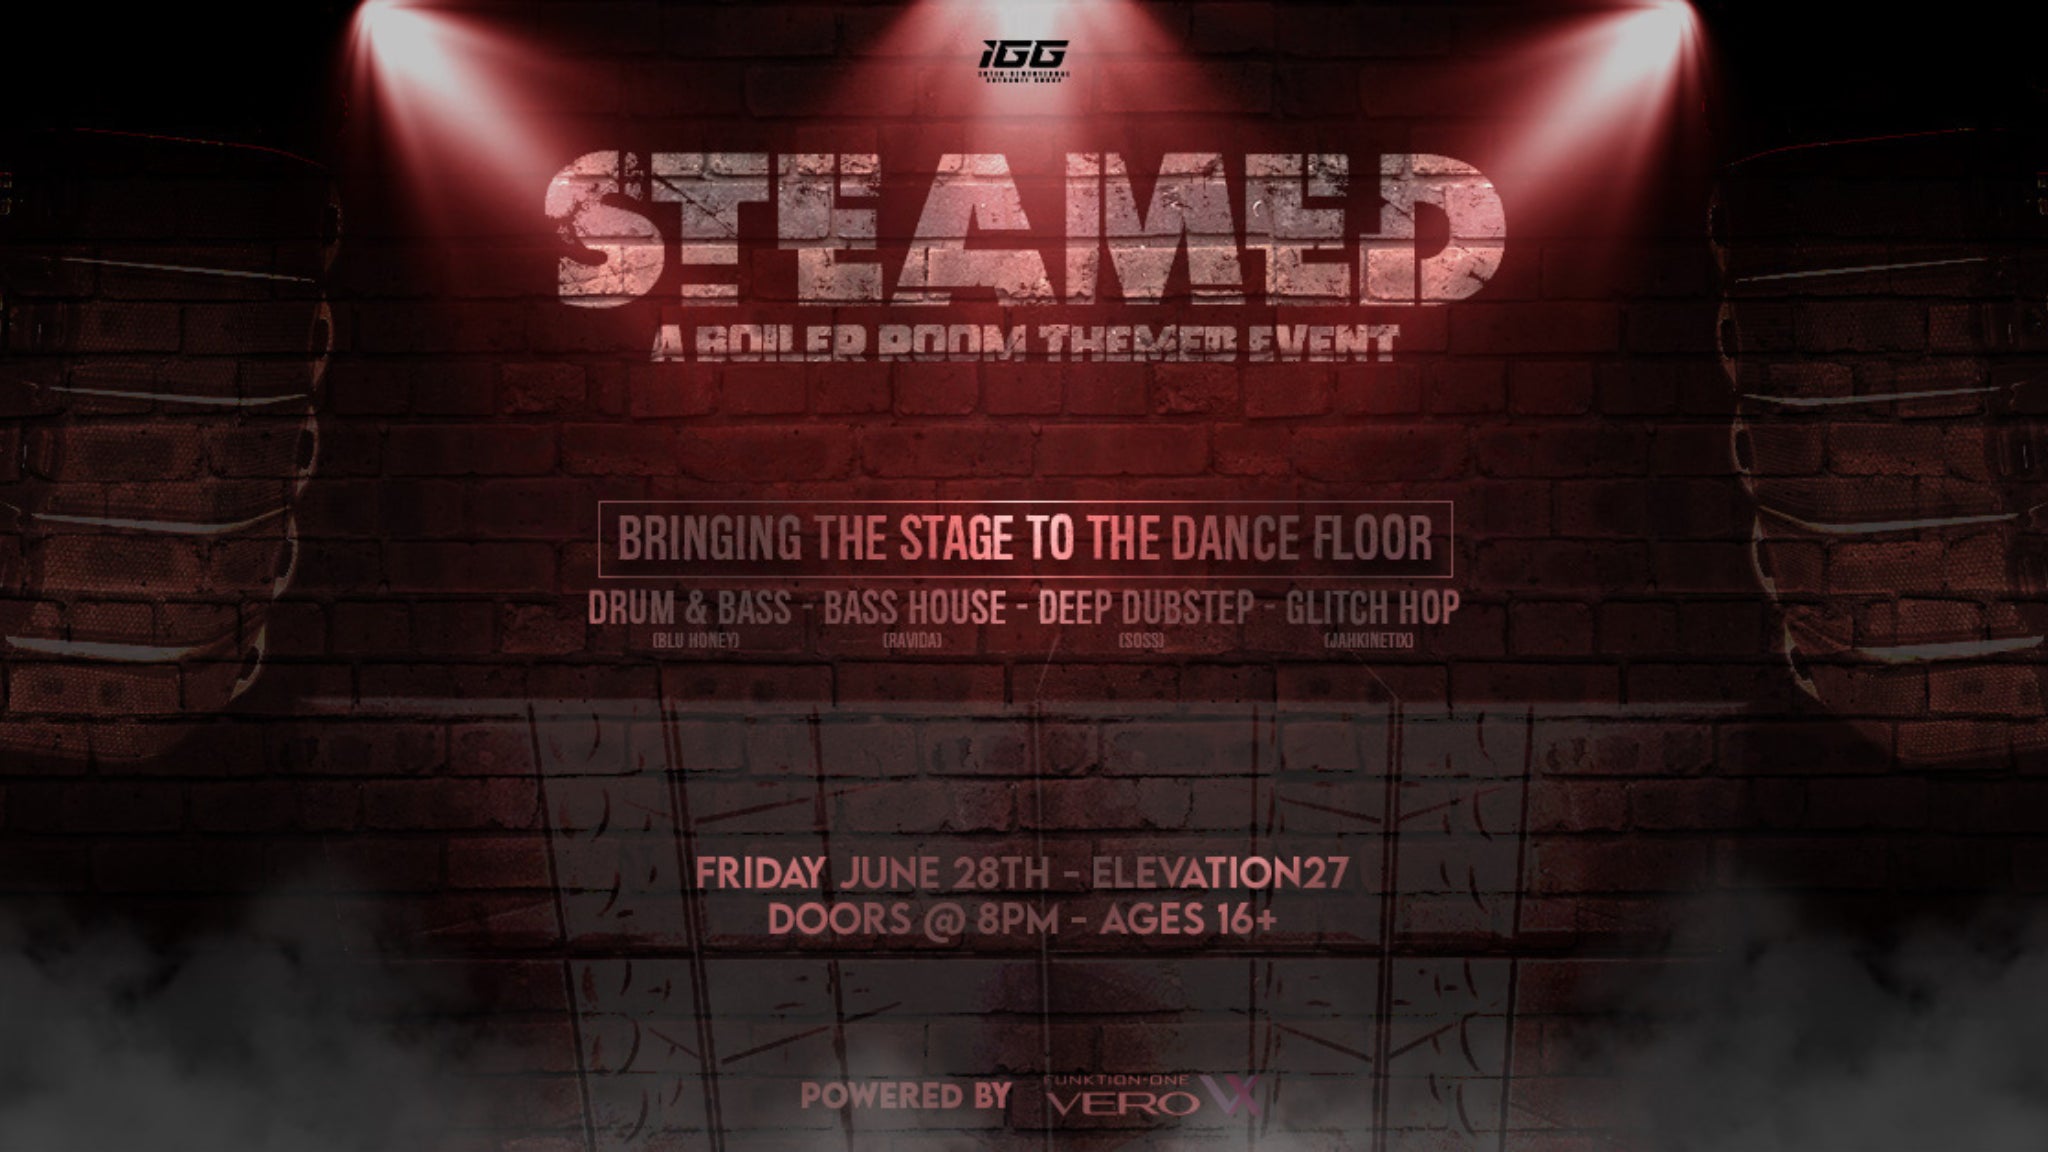 Steamed - A Boiler Room Themed Event @ Elevation 27 (Ages 18 & Up)